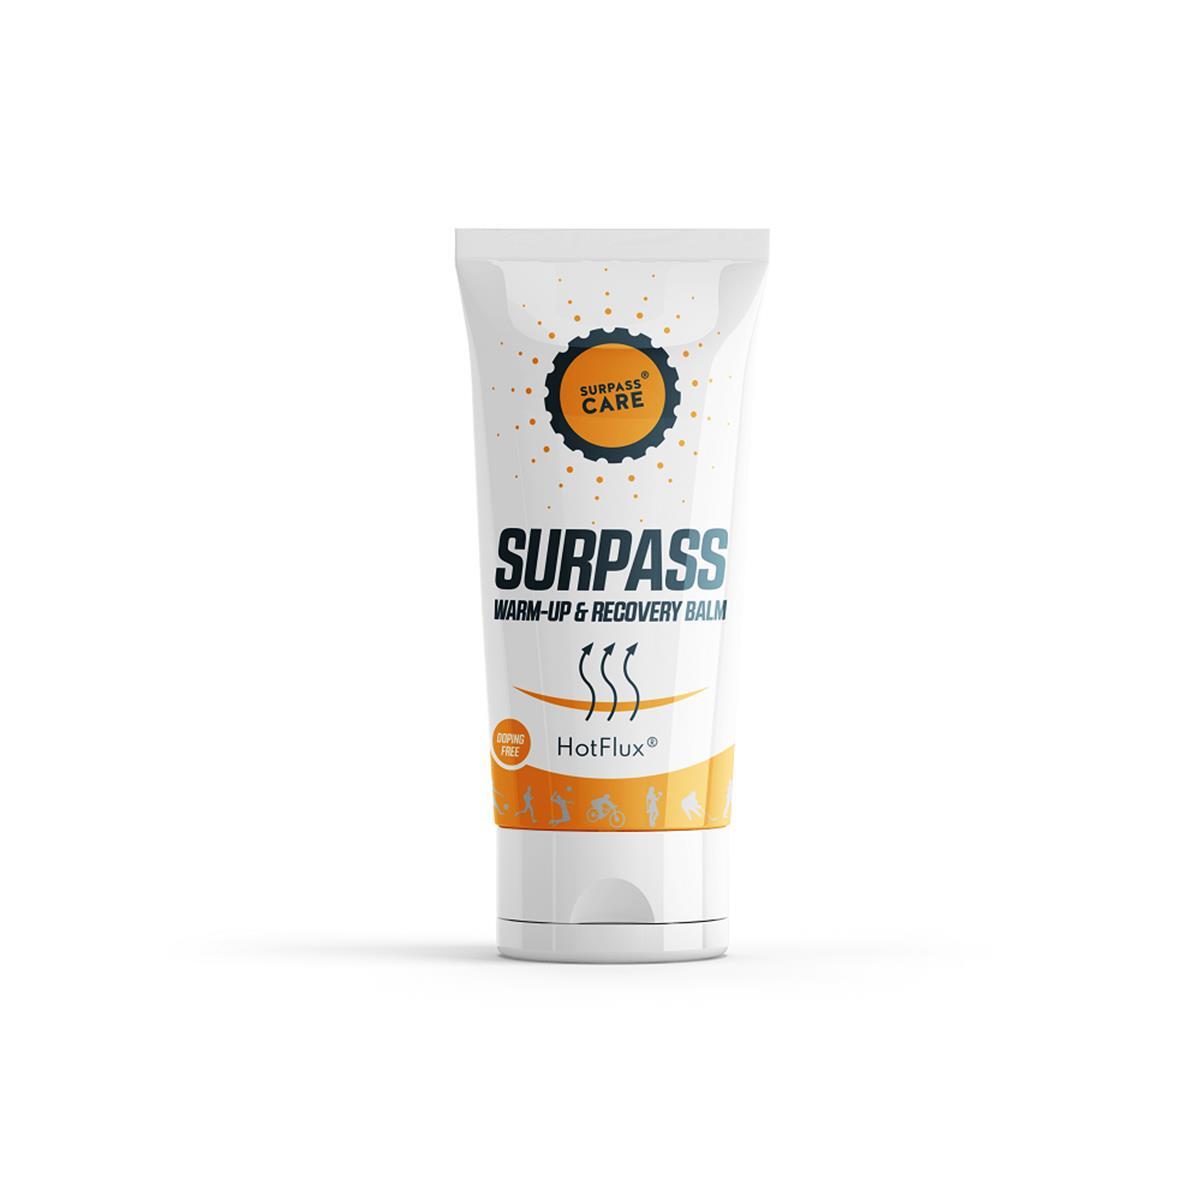 Surpass Care Warm-up & Recovery Balm 1/2